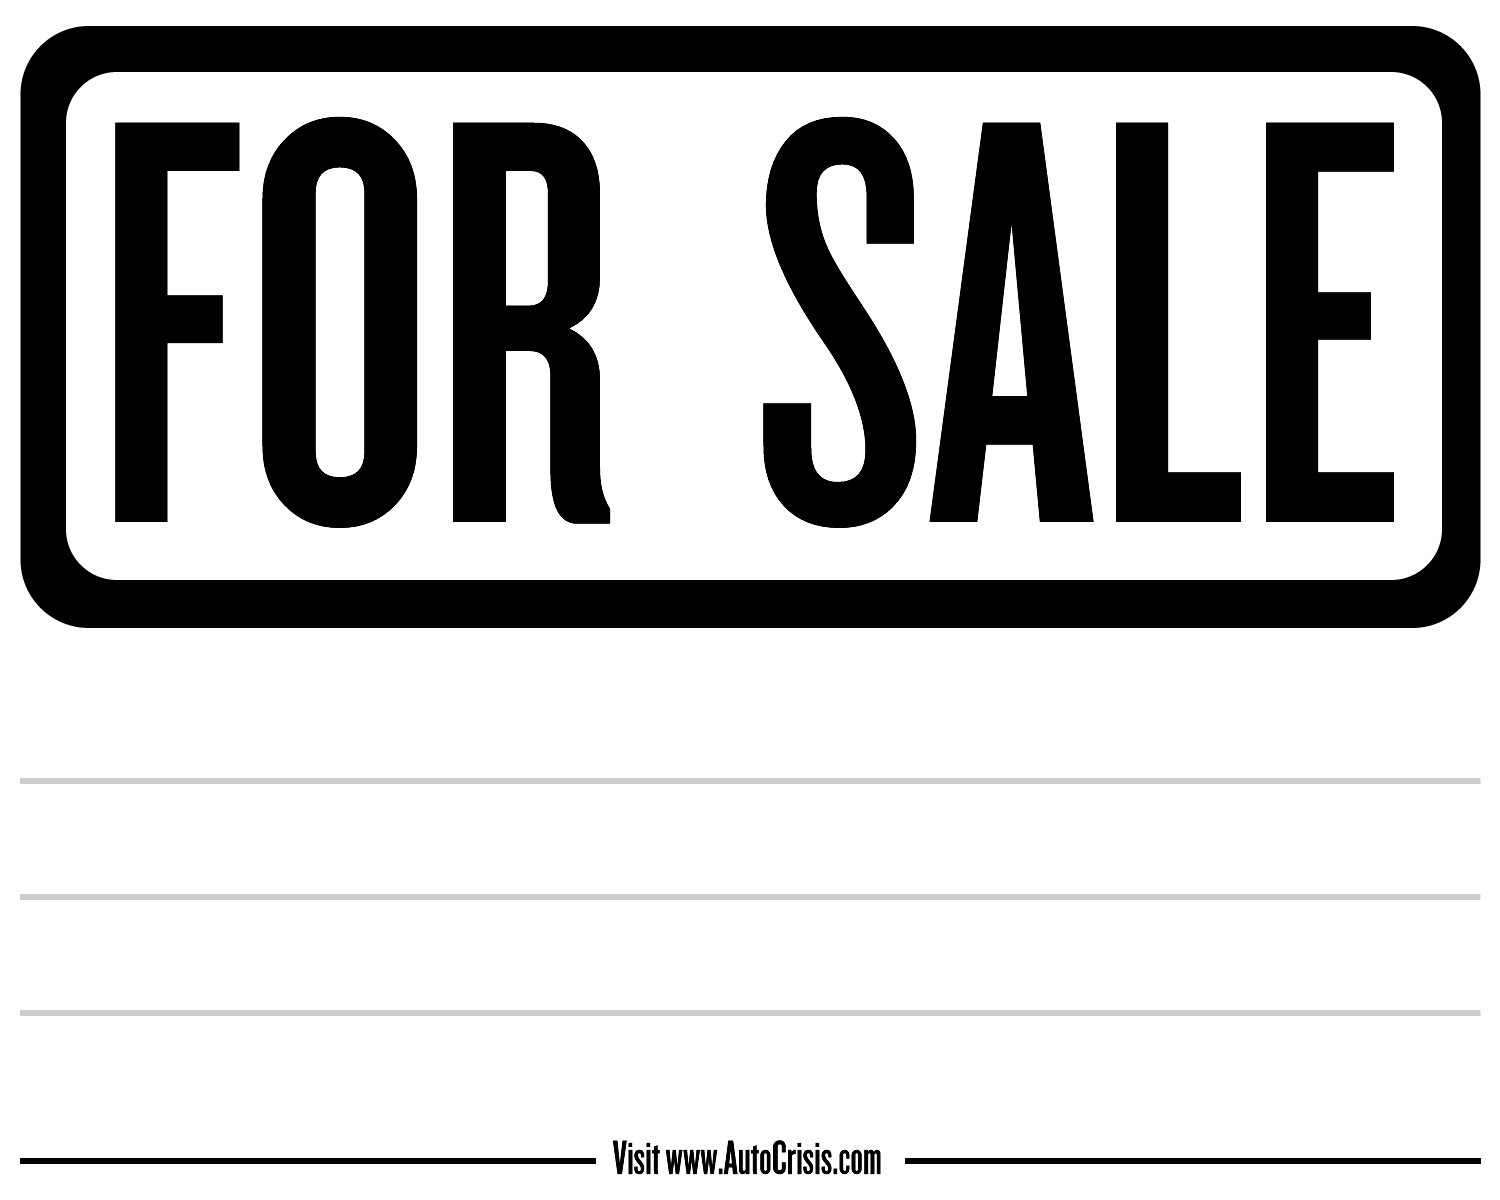 for sale sign printable   Demire.agdiffusion.com